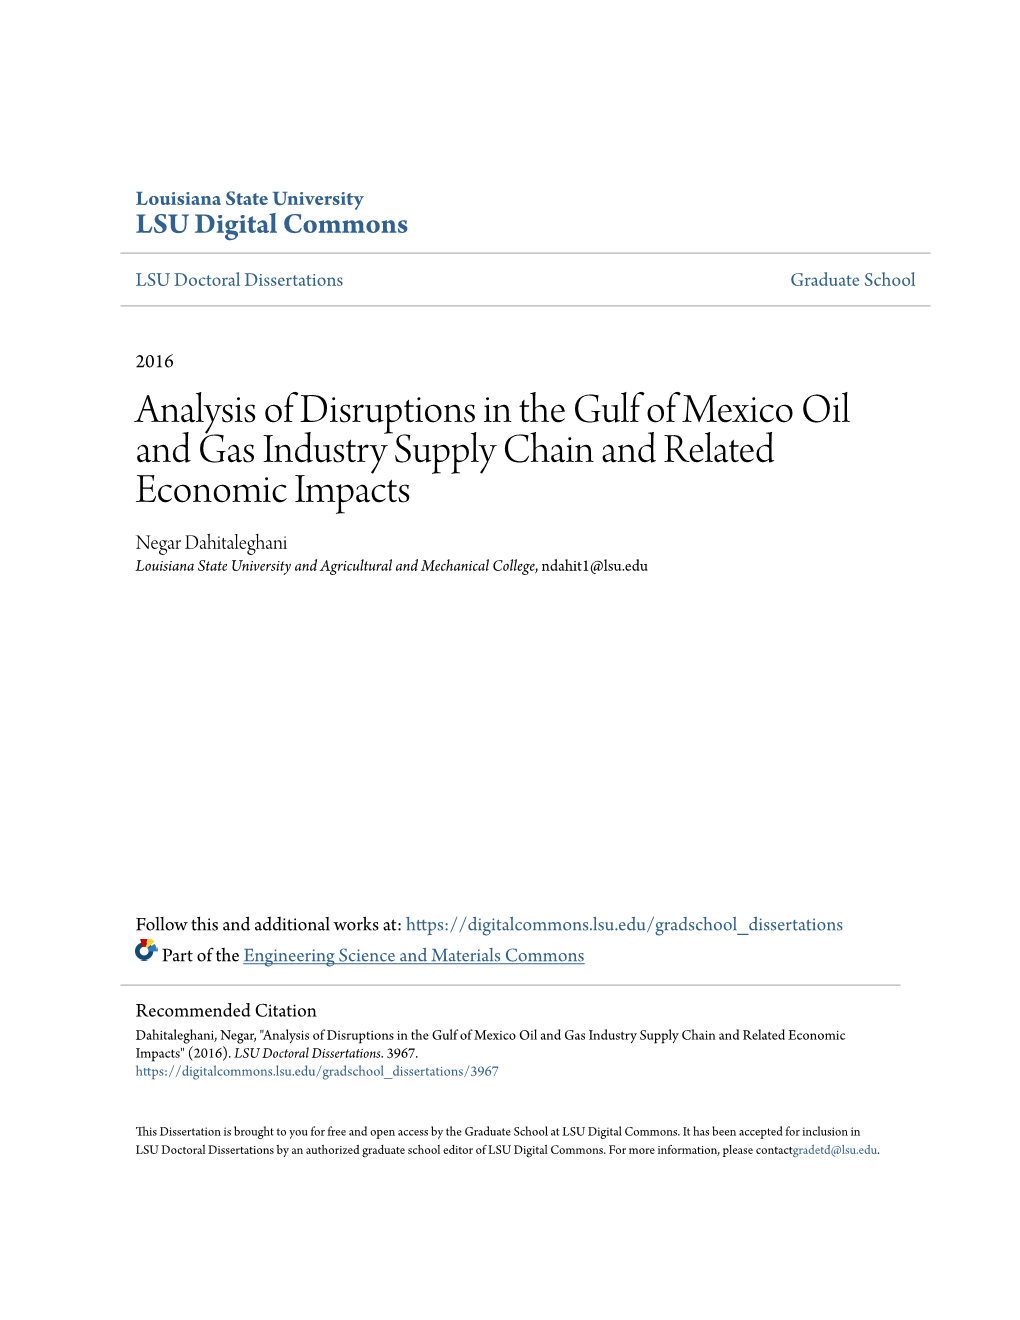 Analysis of Disruptions in the Gulf of Mexico Oil and Gas Industry Supply Chain and Related Economic Impacts